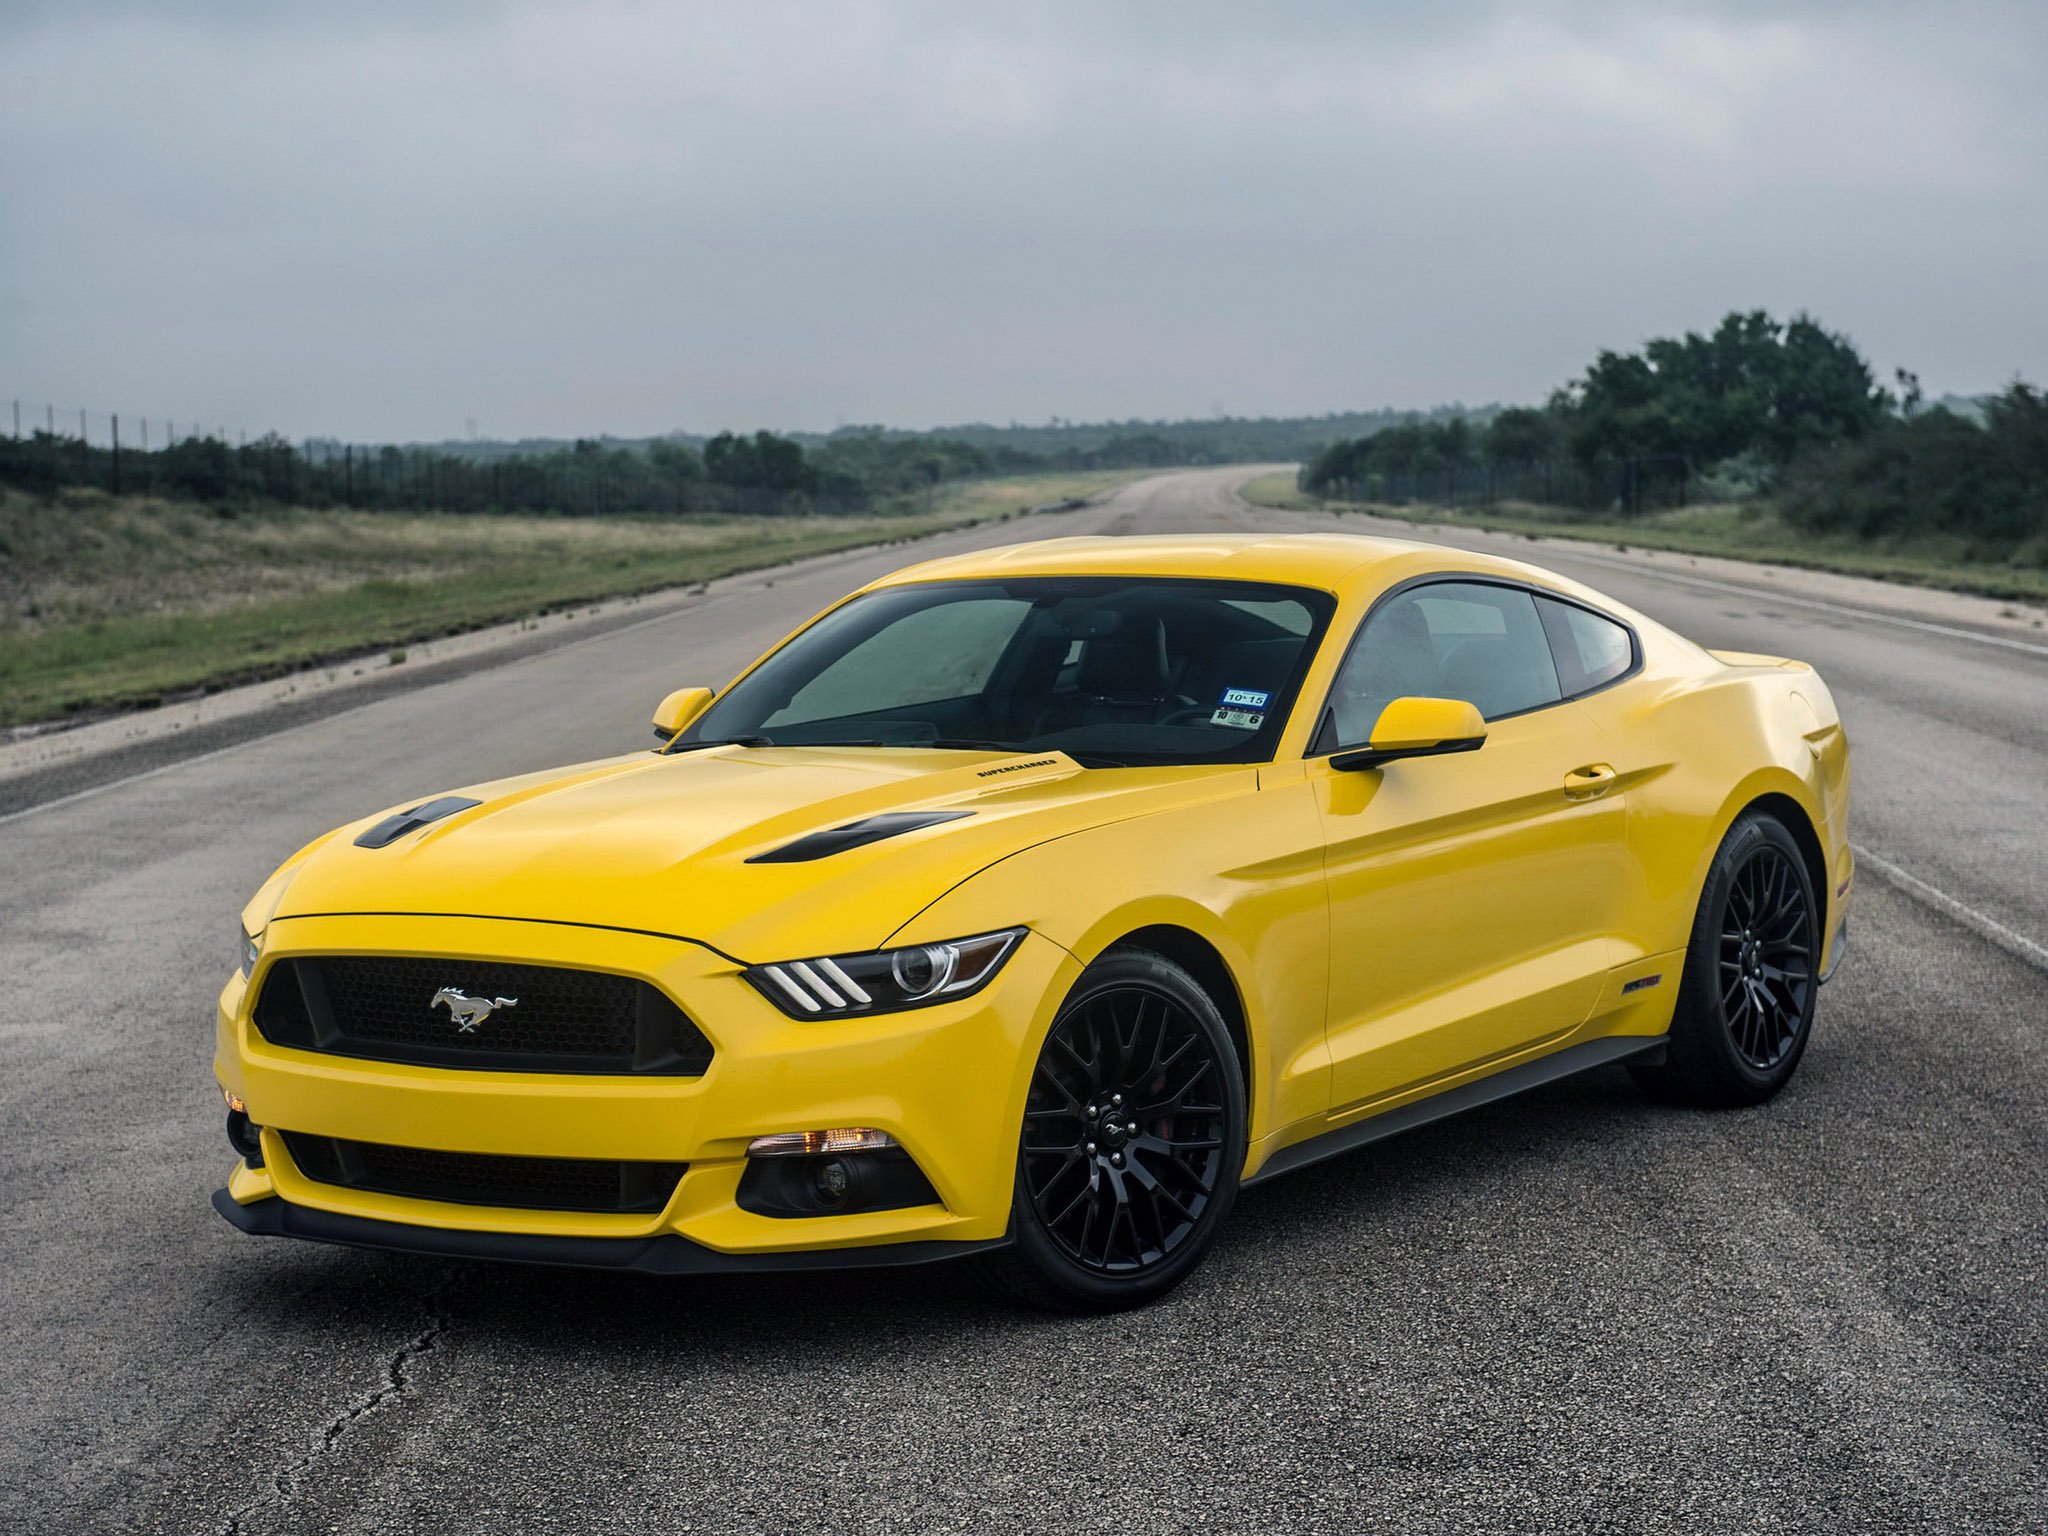 2015, Hennessey, Mustang, G t, Hpe750, Supercharged, Muscle, Ford Wallpaper